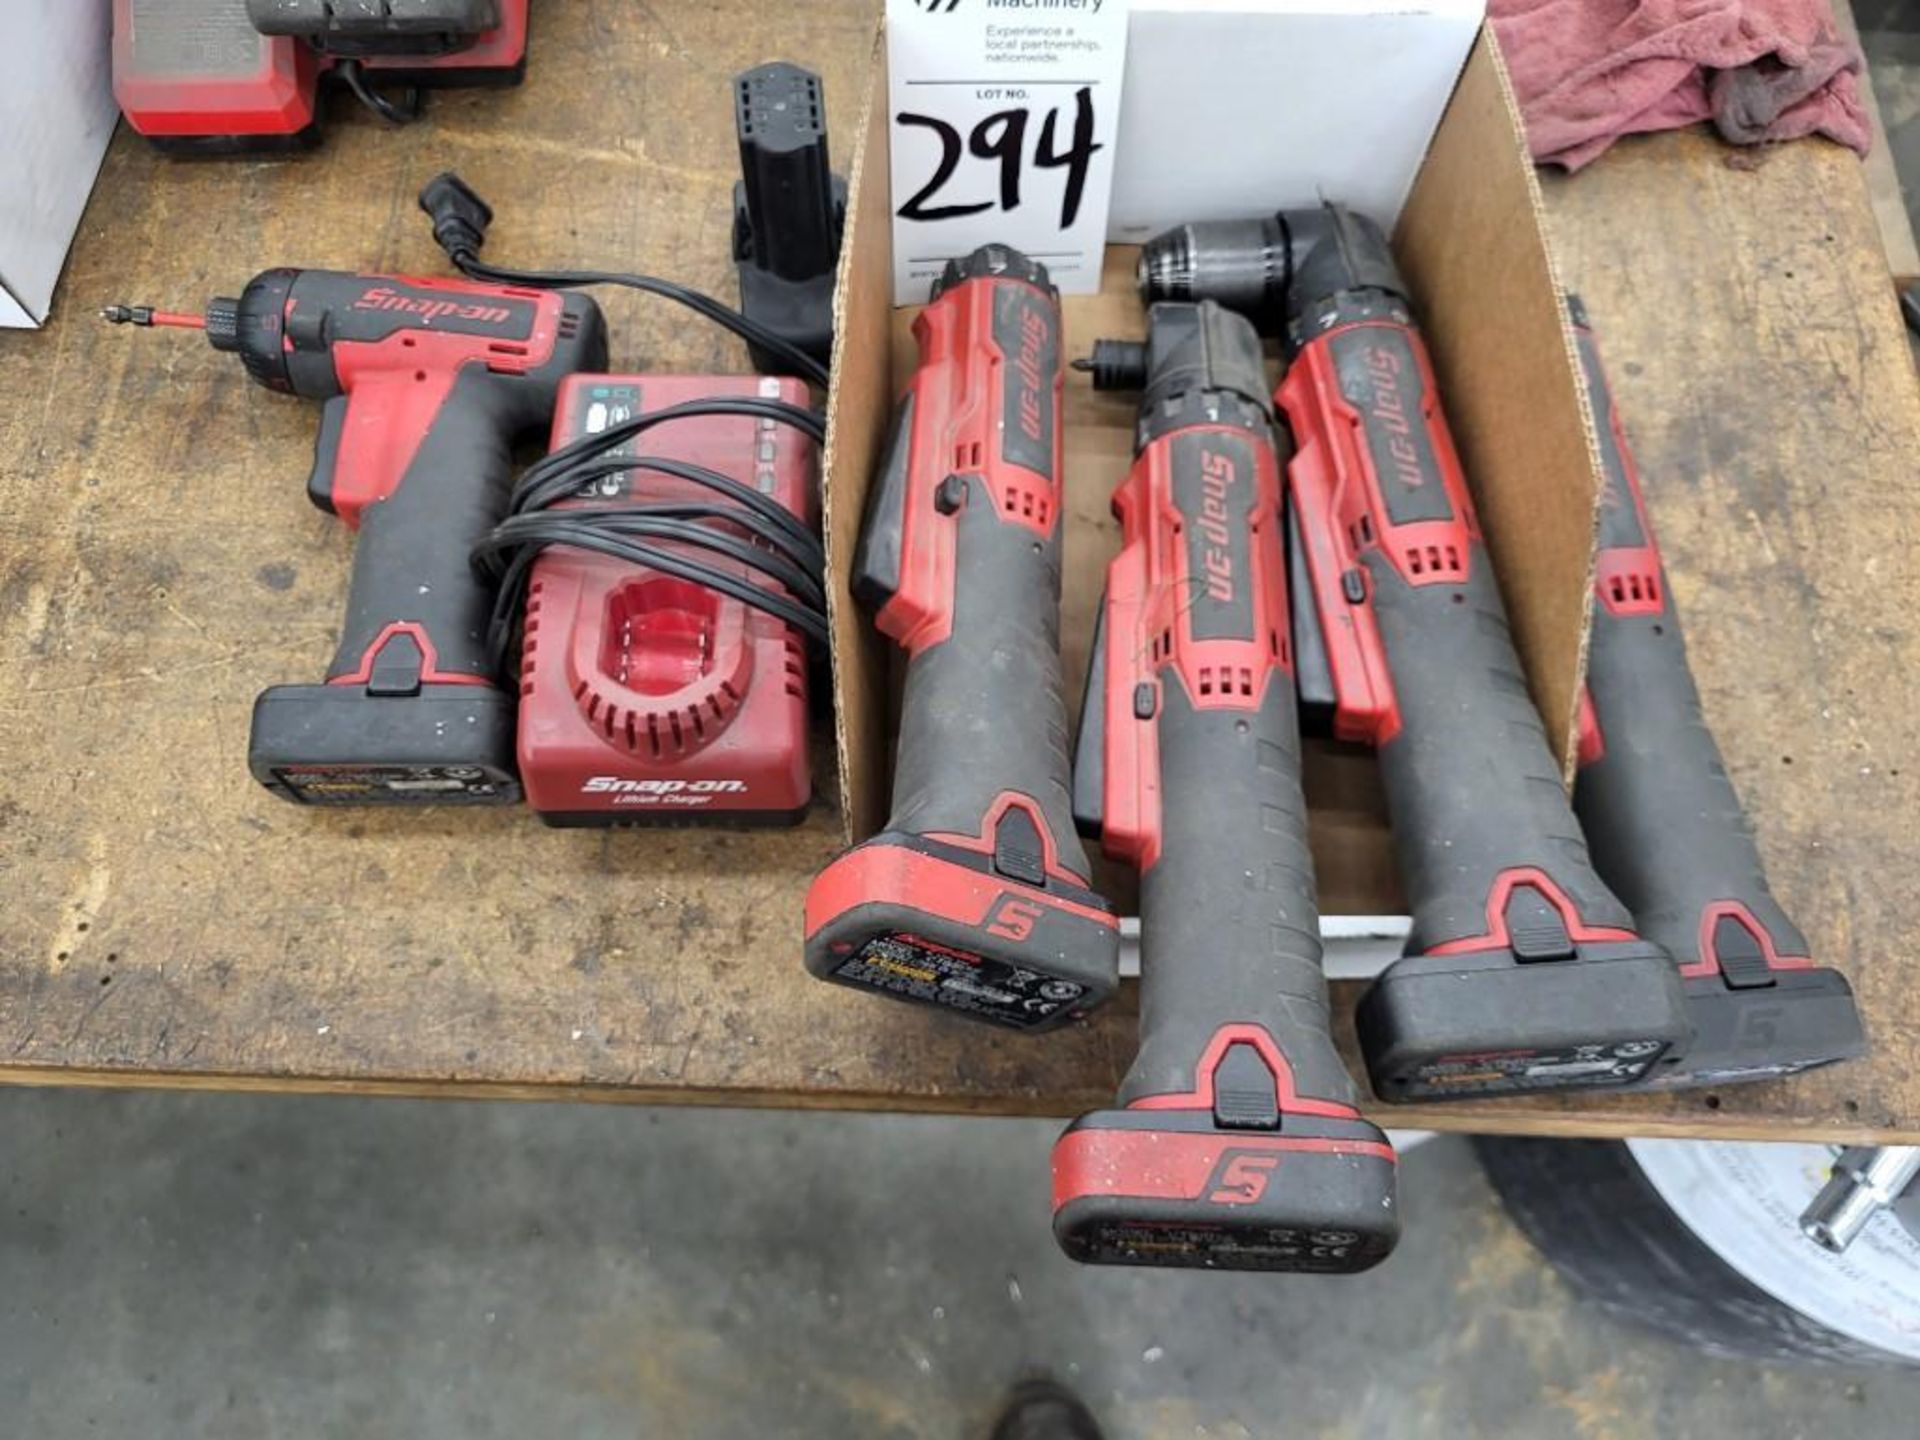 LOT OF SNAP-ON CORDLESS DRILLS AND DRIVERS. WITH CHARGER AND BATTERIES